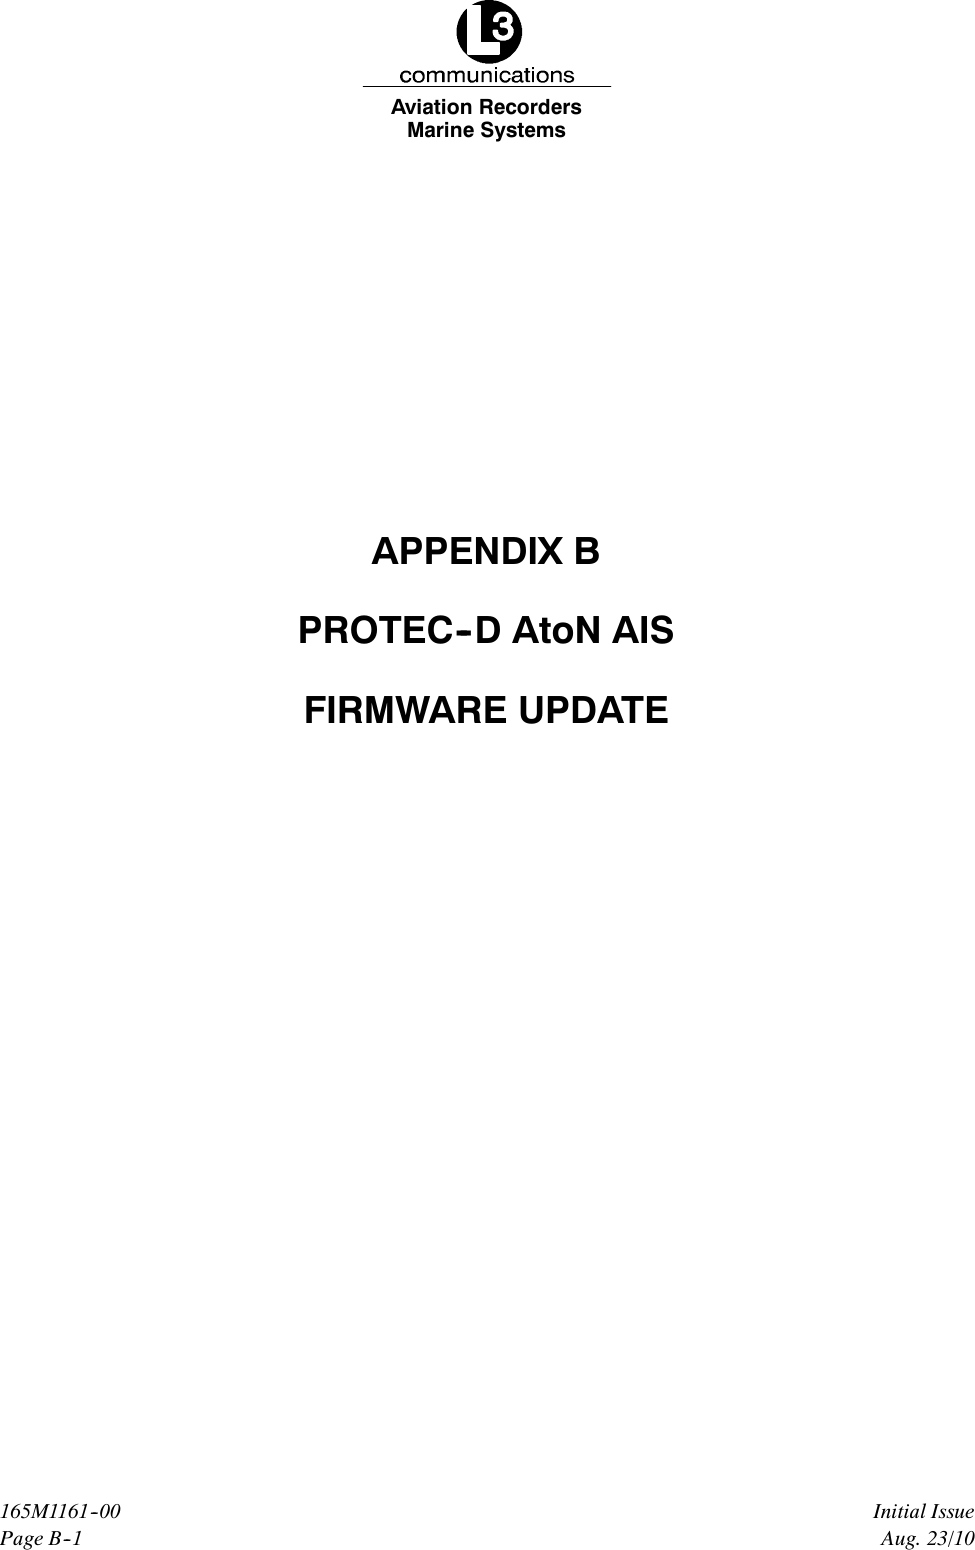 Marine SystemsAviation RecordersPage B--1Initial Issue165M1161--00Aug. 23/10APPENDIX BPROTEC--D AtoN AISFIRMWARE UPDATE